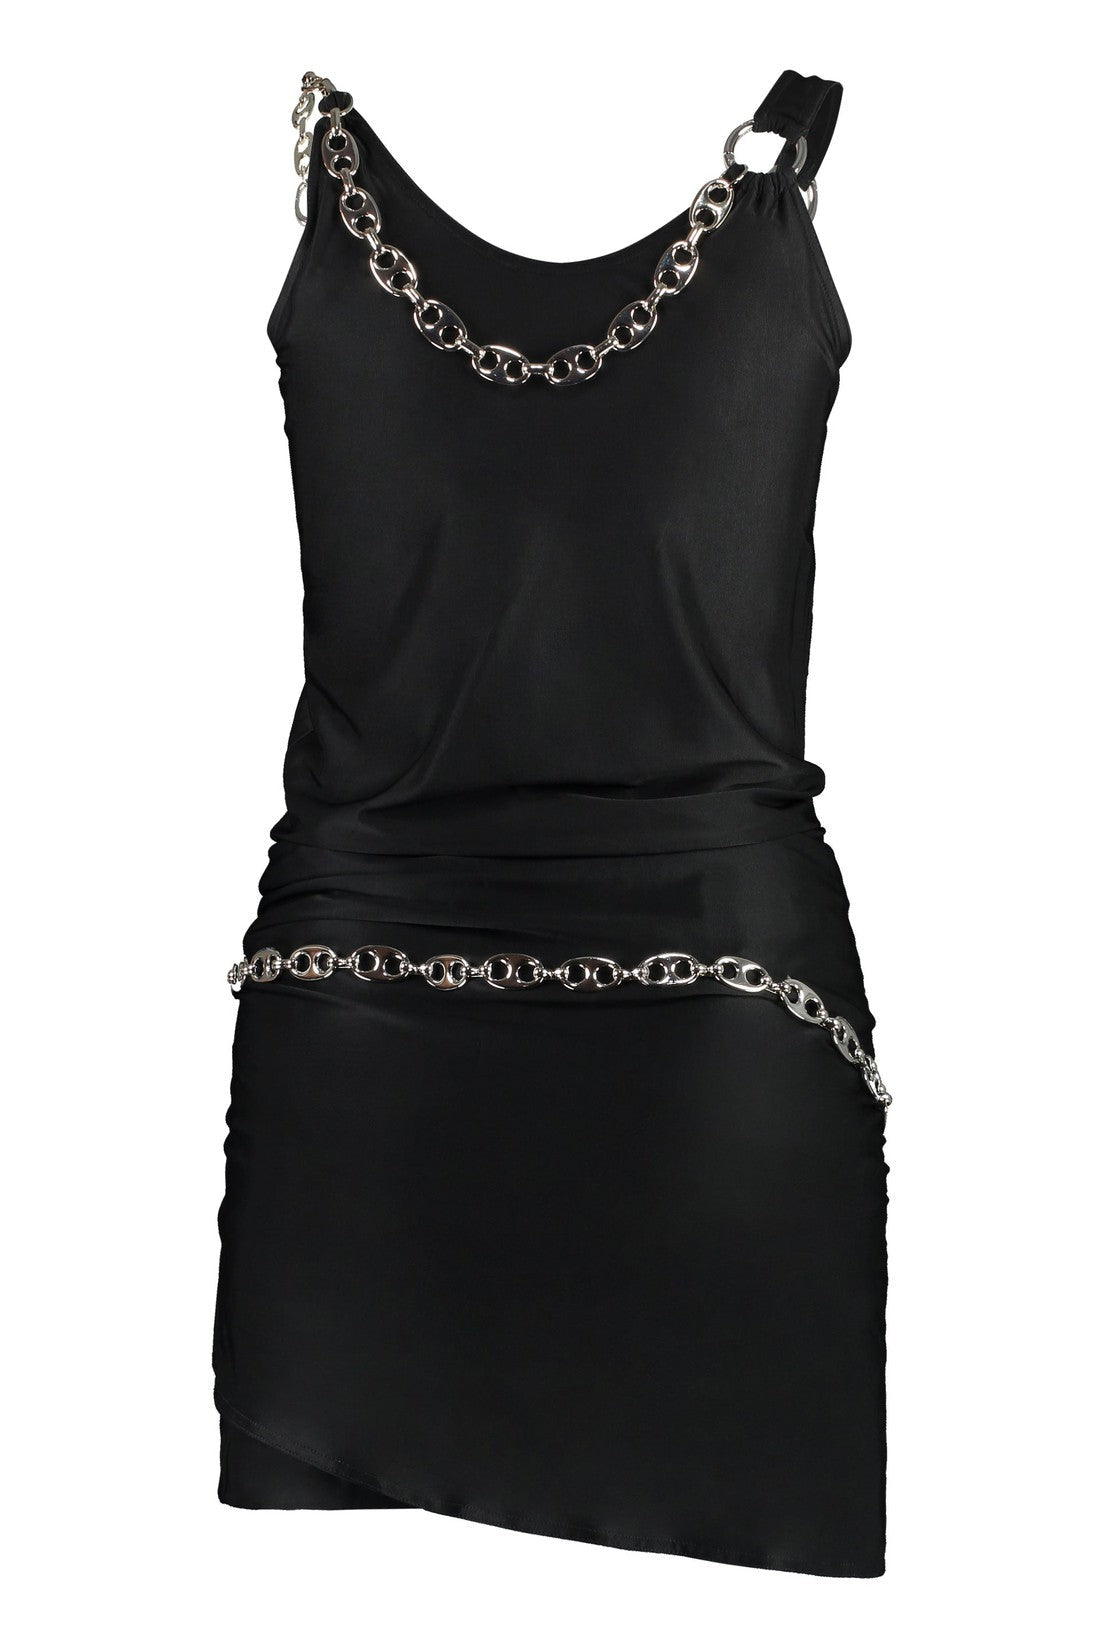 Rabanne-OUTLET-SALE-Dress with chains-ARCHIVIST